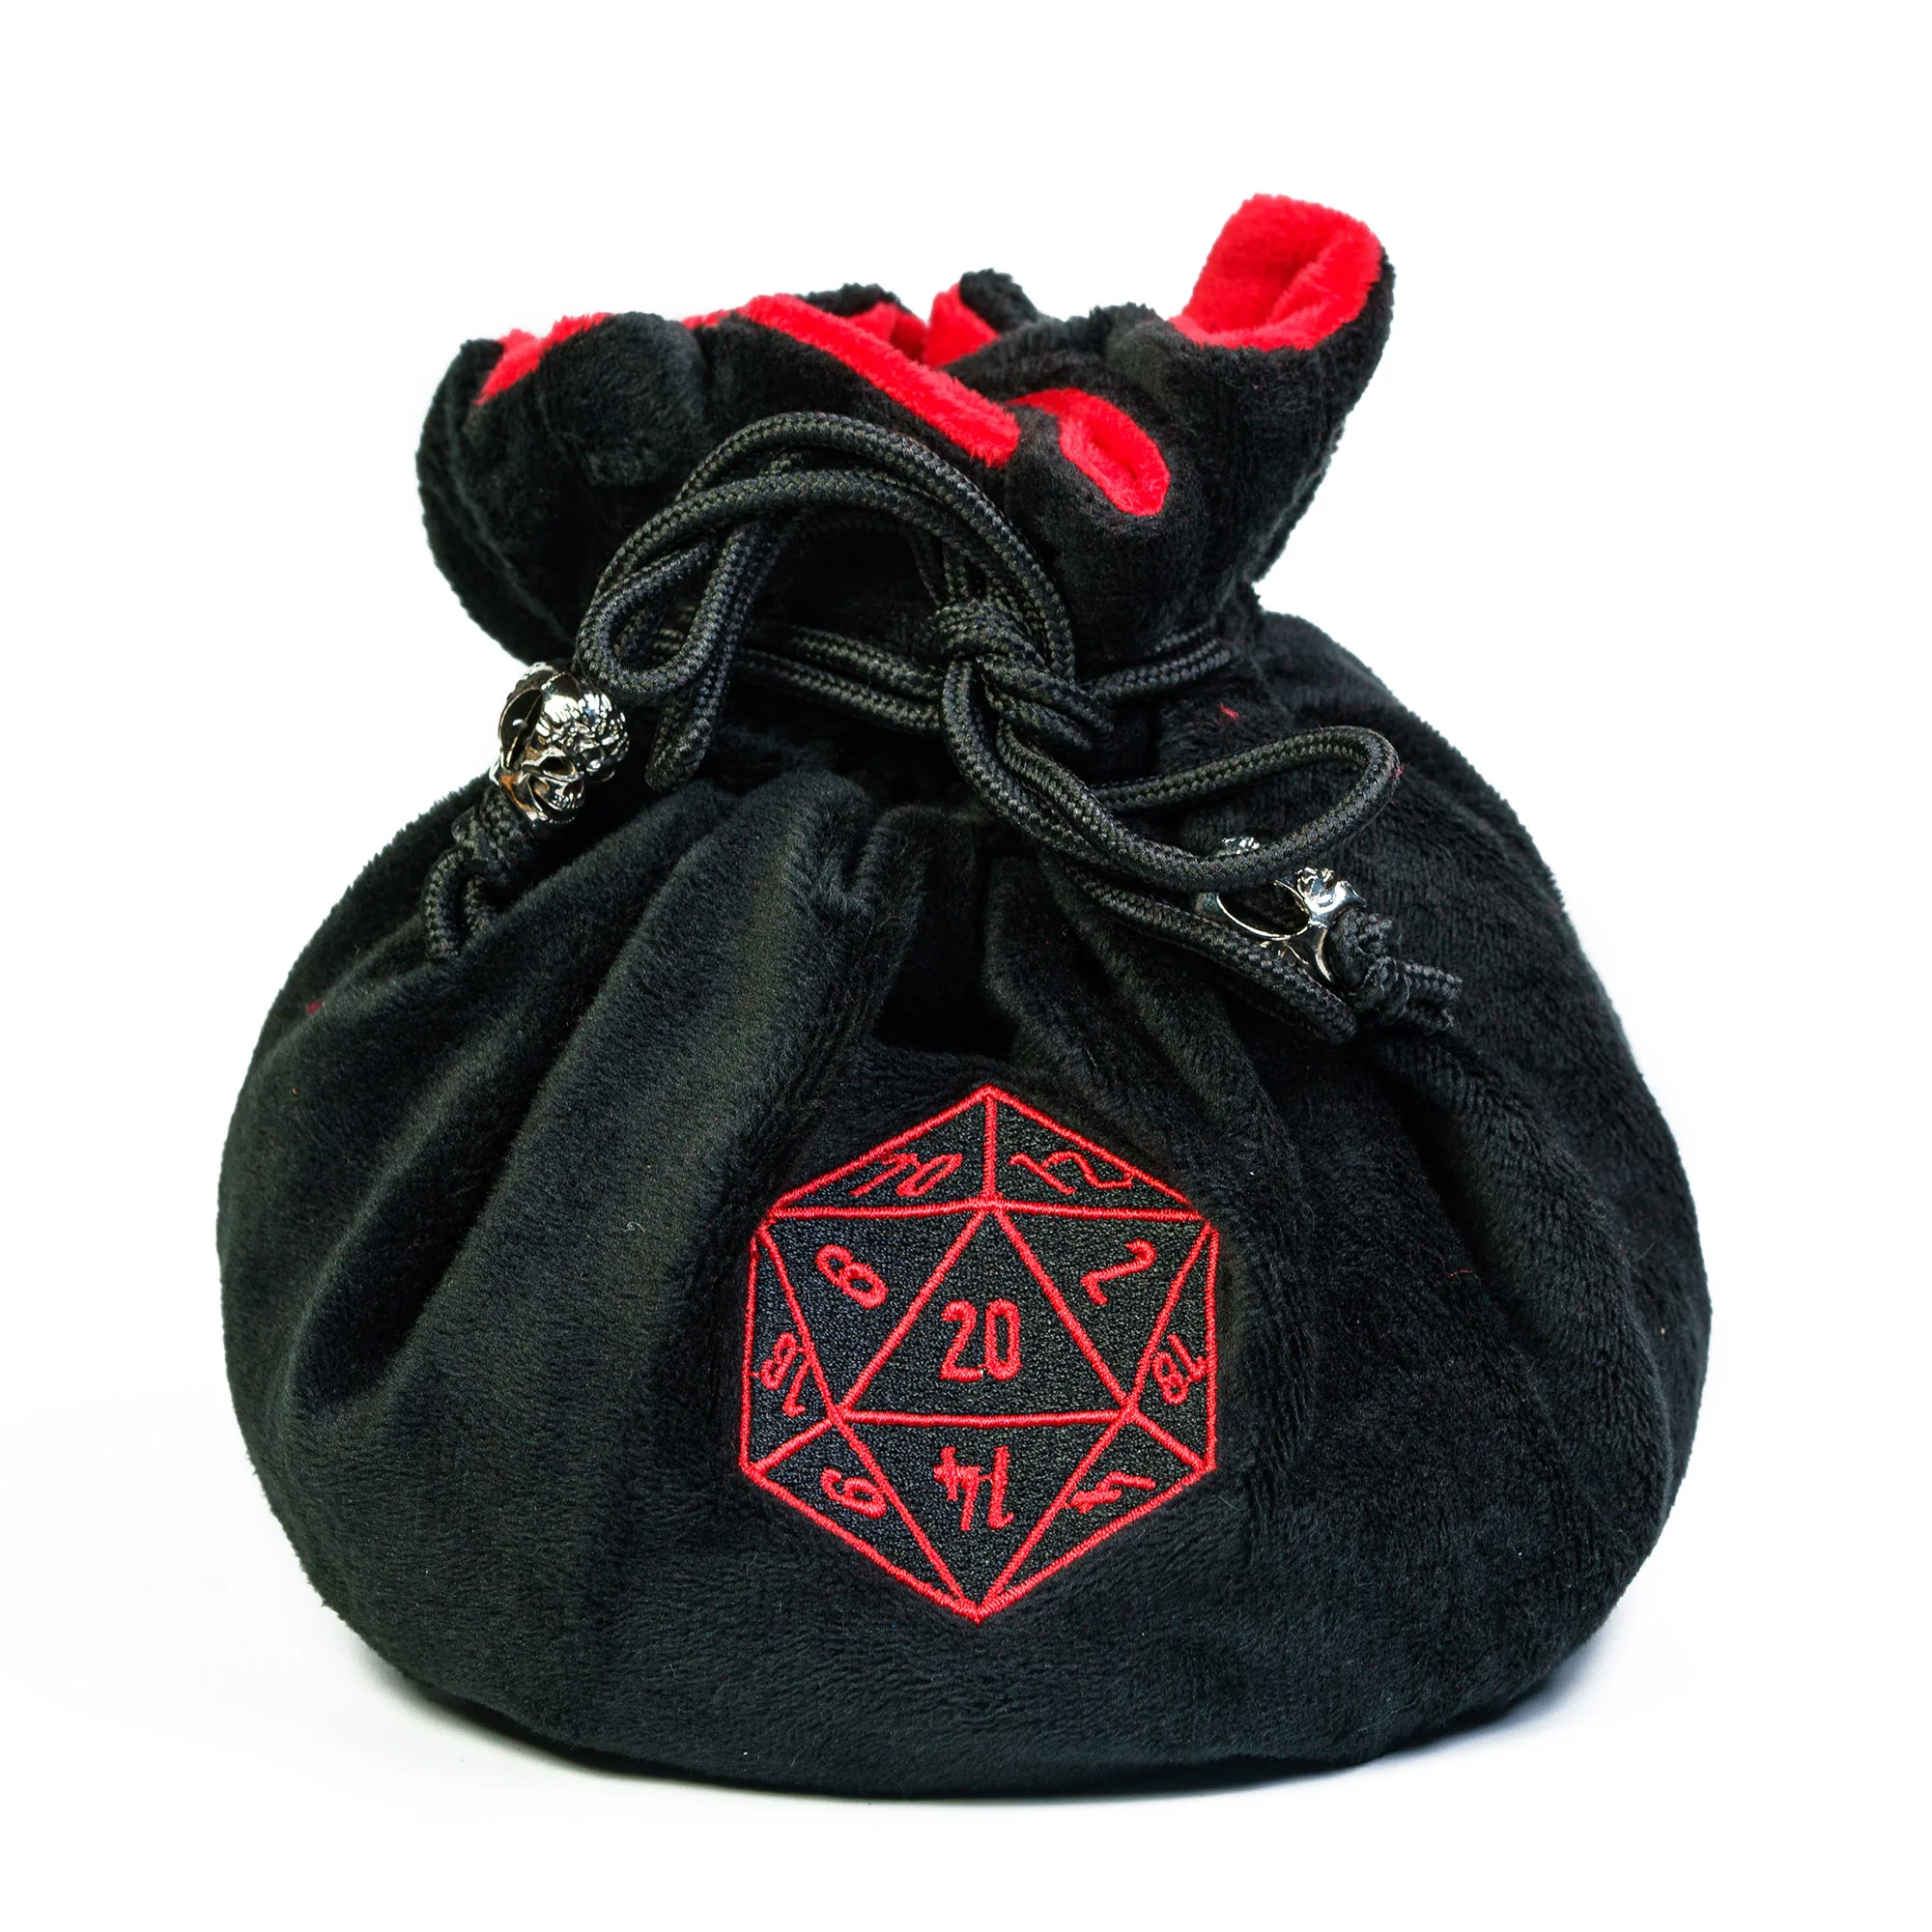 Dice Game Bag Leather Large Dice Bag of Holding Drawstring 